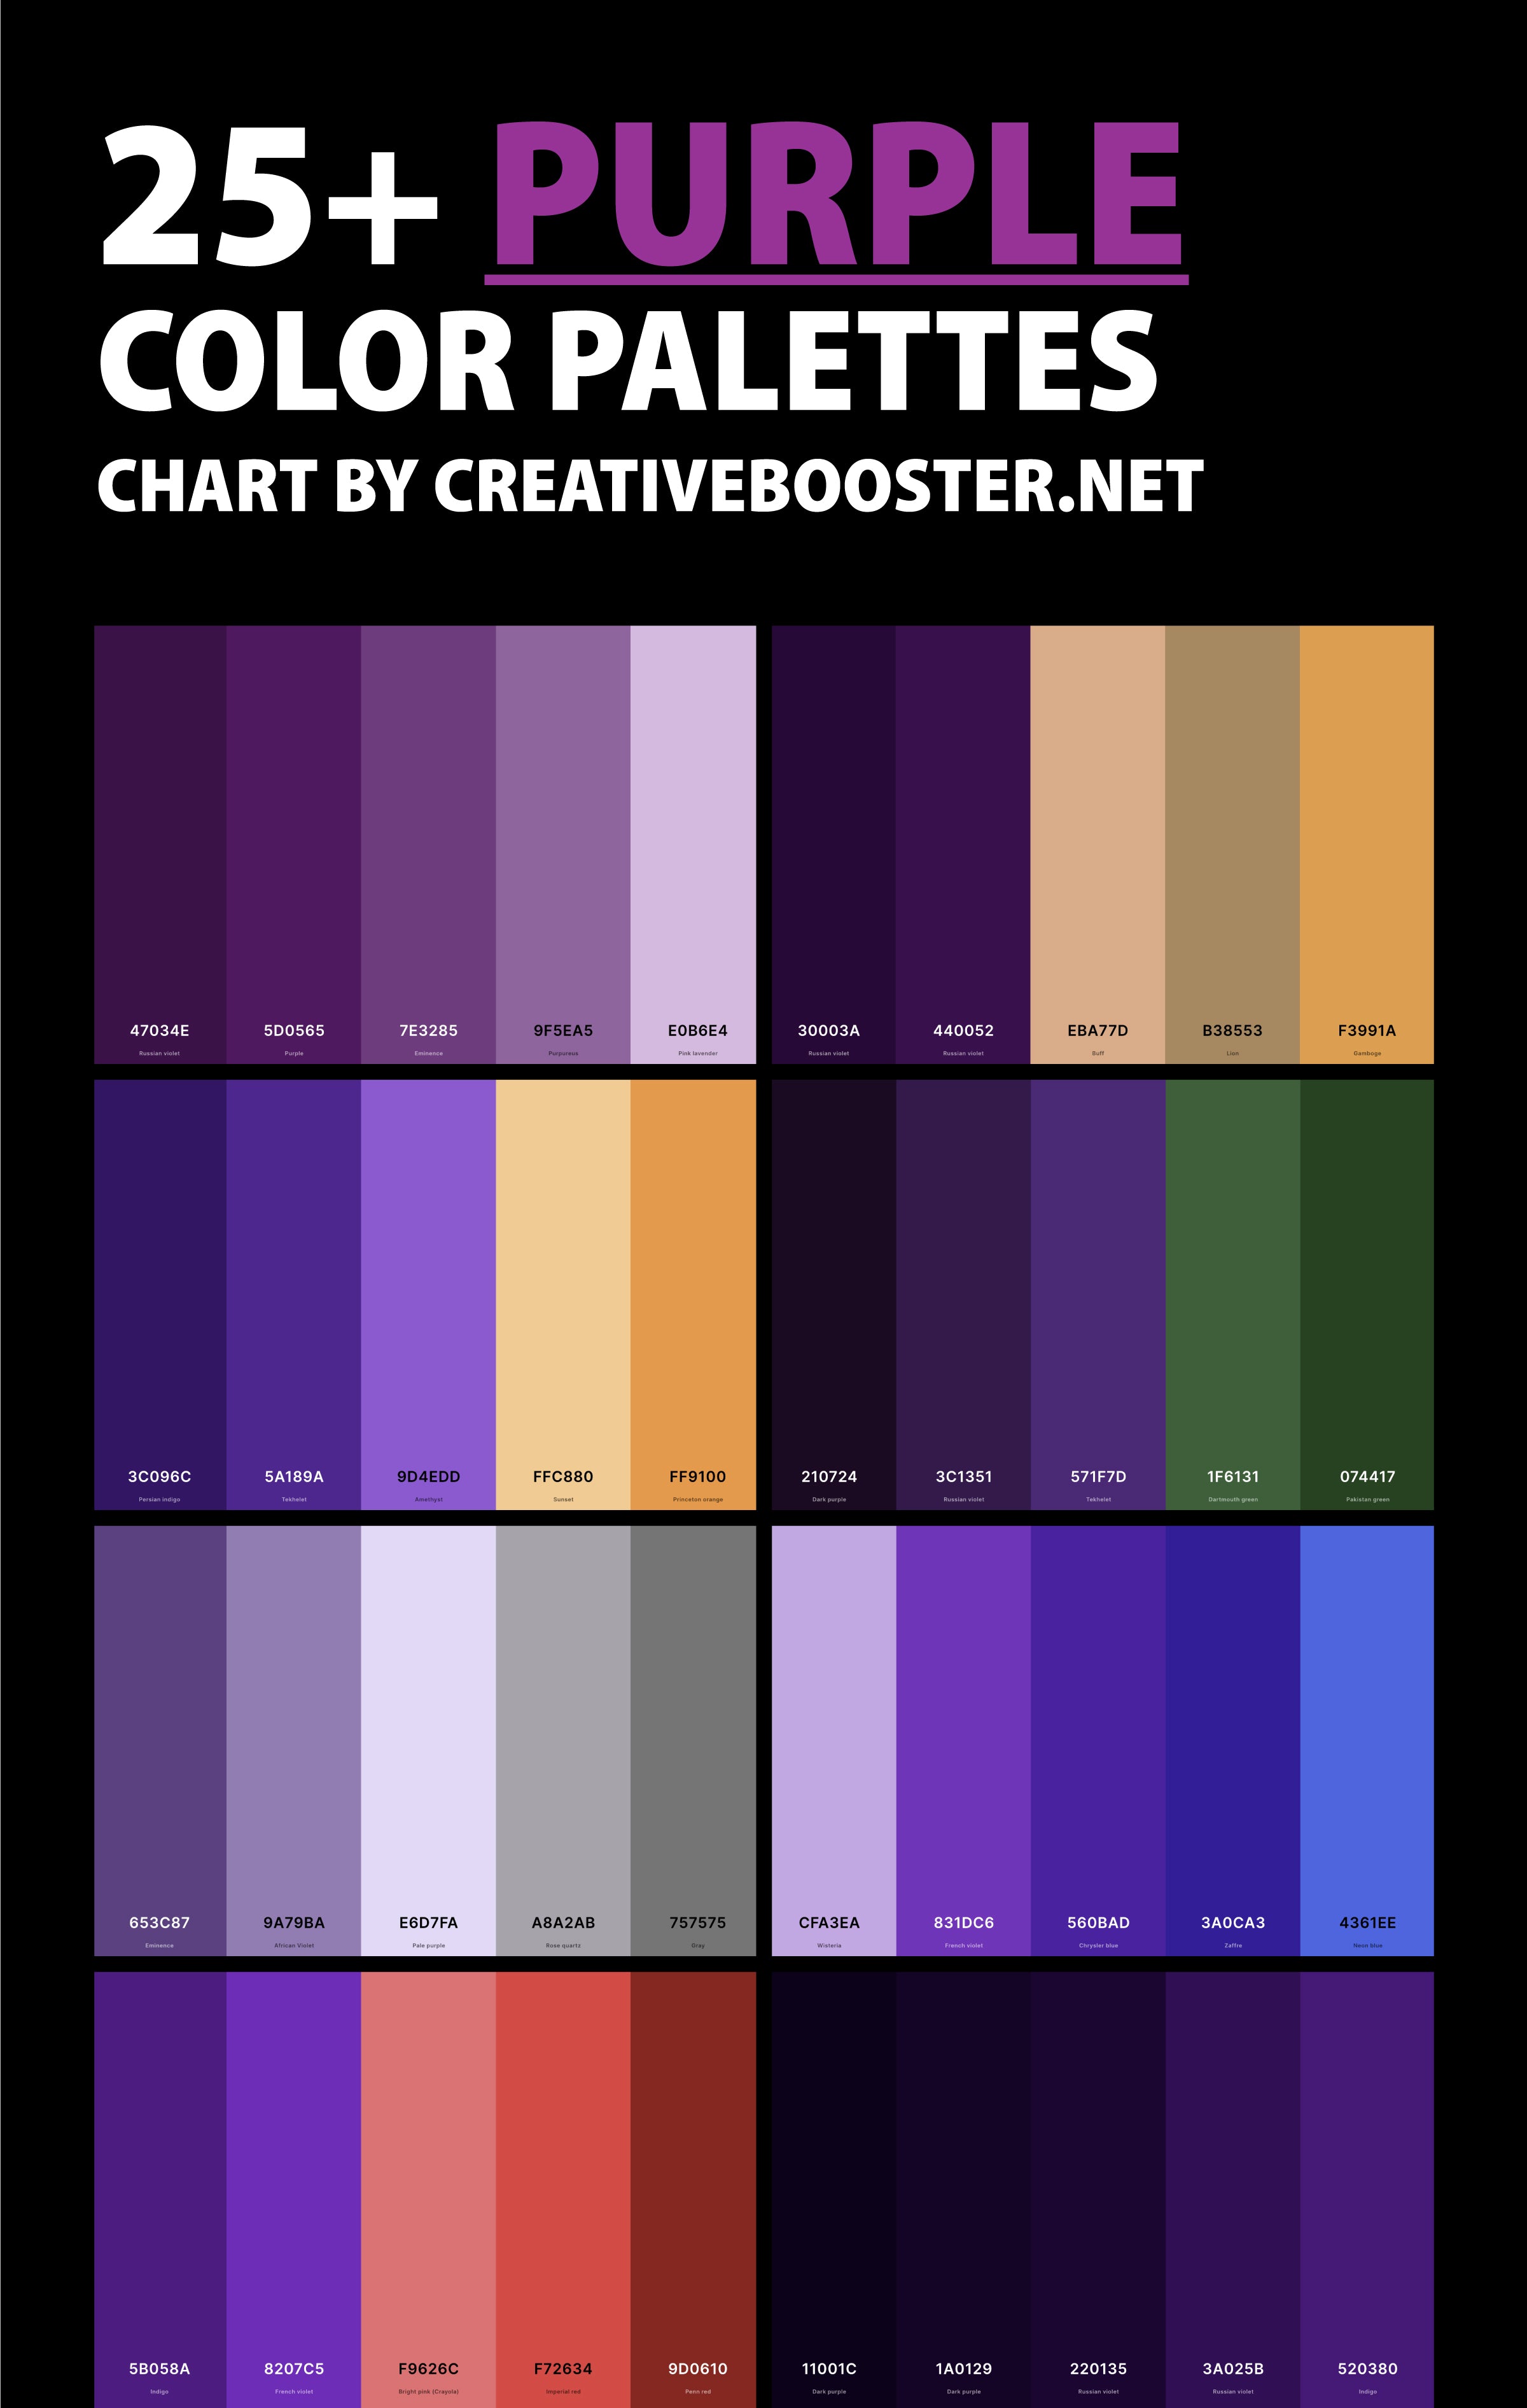 purple-color-palettes-chart-with-names-and-hex-codes-pinterest